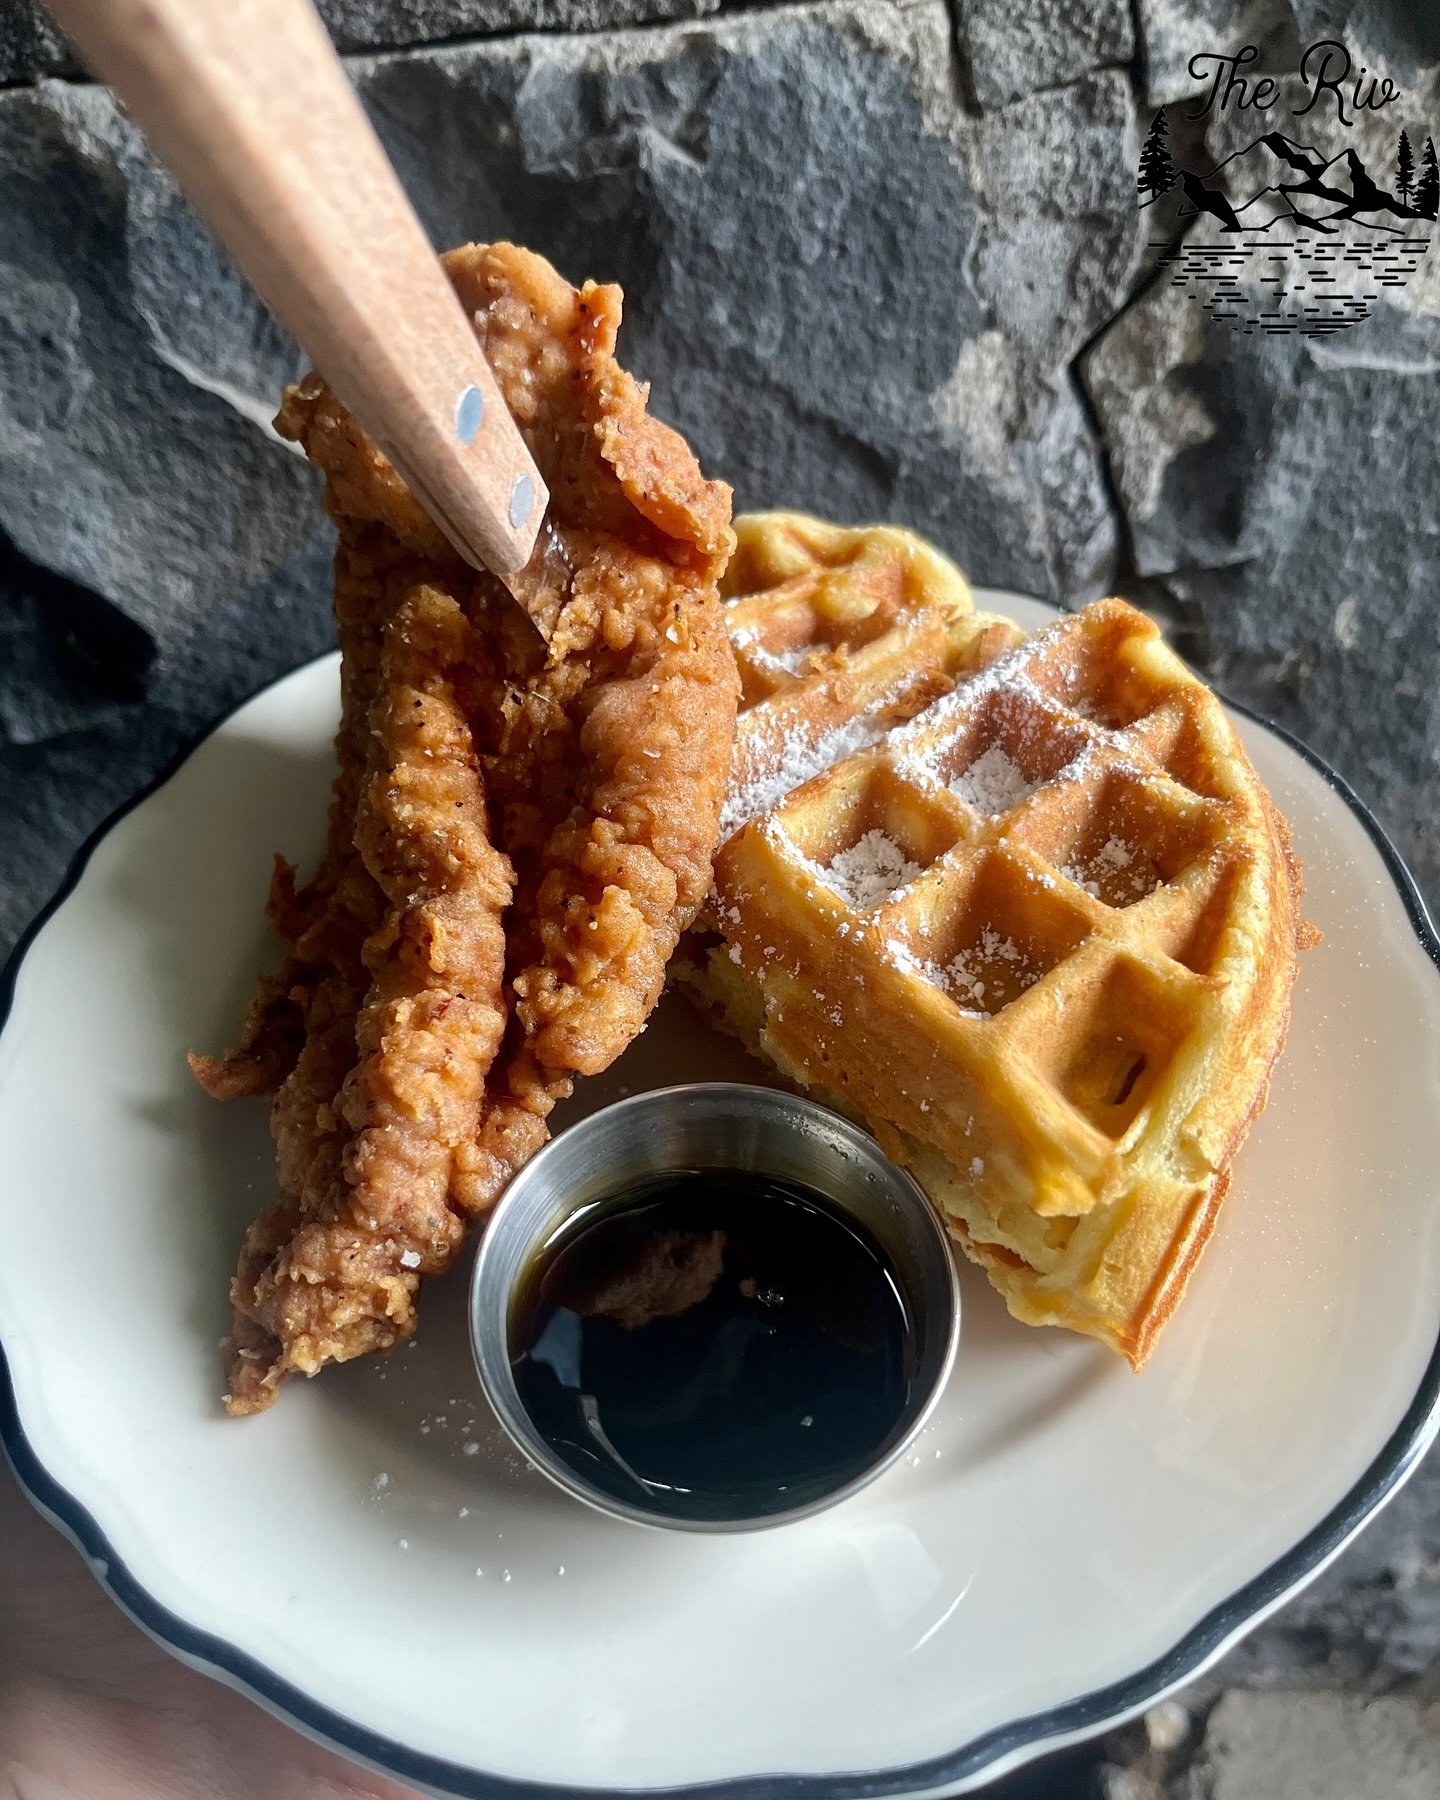 Chicken &amp; Waffles 🧇 

Classic &amp; perfect. 

#coffee #theriv #cafe #specialtycoffee #specialtyroaster #yelptop100 #pnw #oregon #foodie #breakfast #brunch #lunch #coffeeshop #lunchspot #smallbusiness #thegorge #shoplocal #espresso #chickenandwa